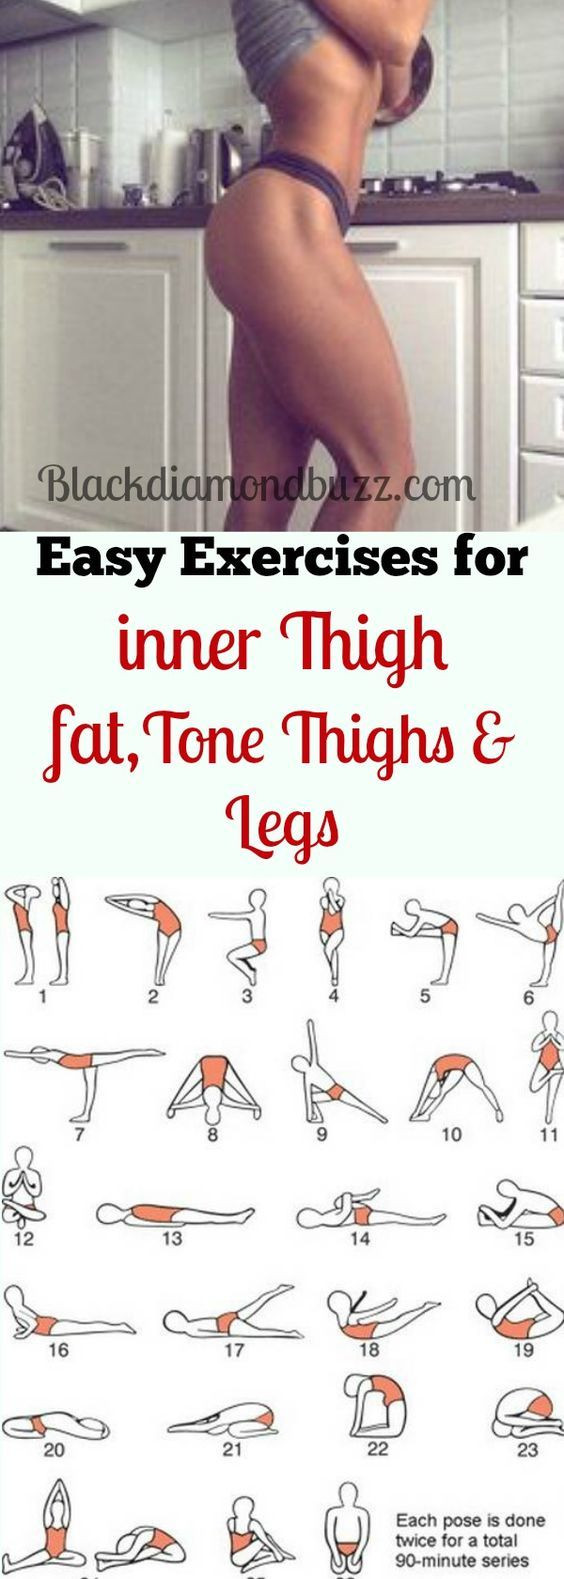 Inner Thigh Fat Burning Workout
 Best 25 Lose thigh fat fast ideas on Pinterest